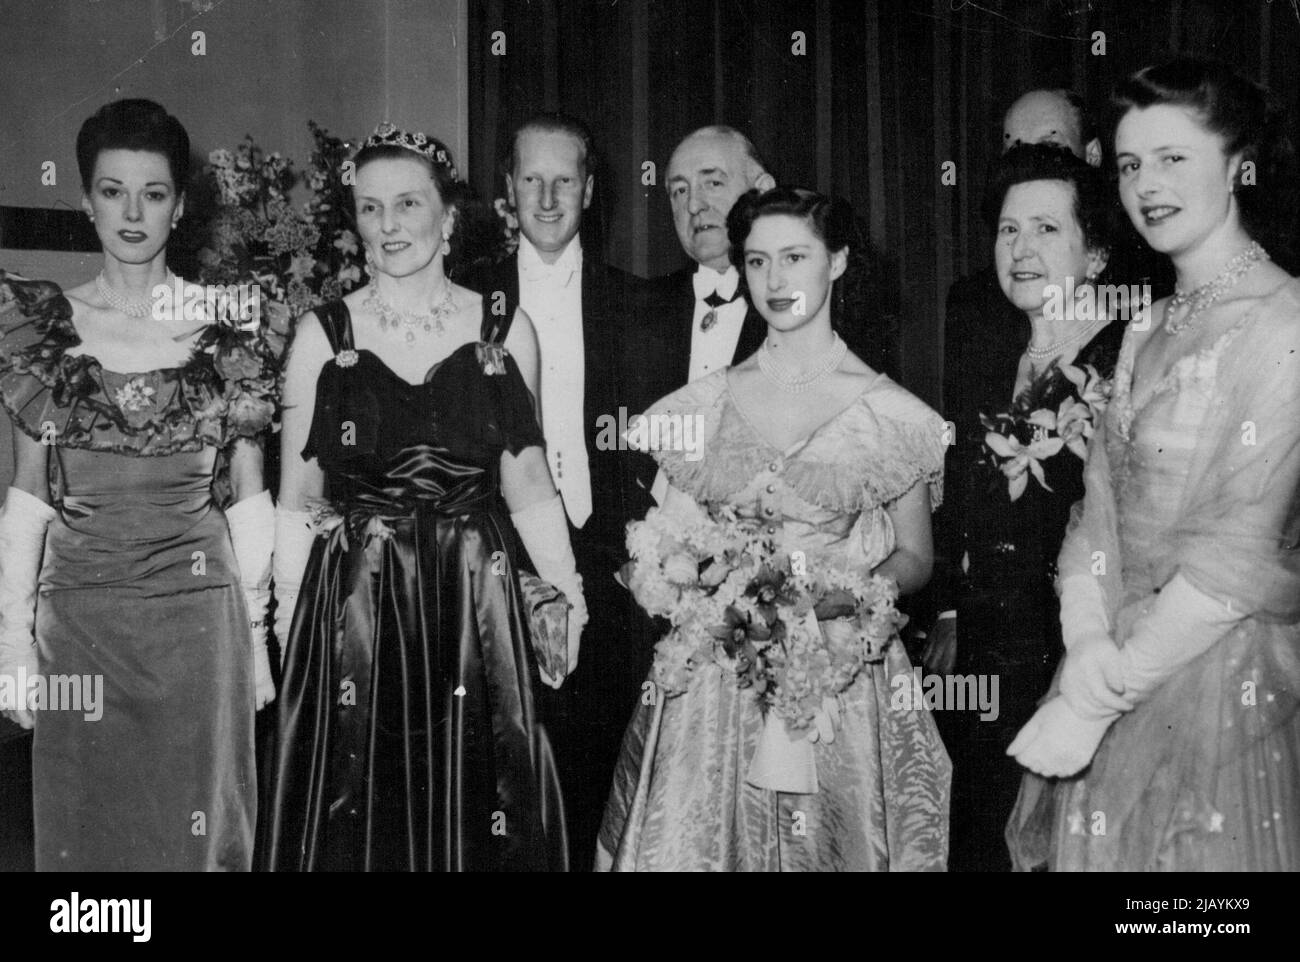 Princess Margaret's Week-End In Scotland -- The Buccleuch party at the Ball held in Glasgow in aid-of the Scottish Association of Girls' Clubs. Left to right: Miss Sheila Carlow, the Duchess of Buccleuch, the Earl of Dalkeith, 25-year-old only son of the Duke of Buccleuch, Sir Hector McNeill, Lord Provost of Glasgow, Princess Margaret, Lady McNeil, and Lady Caroline Scott, 21-year-old younger daughter of the Duke and Duchess of Buccleuch, one of Princess Margaret's great friends. Princess Margaret is week-ending in Scotland. She is staying with the Duke and Duchess of Buccleuch at Drumlanrig C Stock Photo